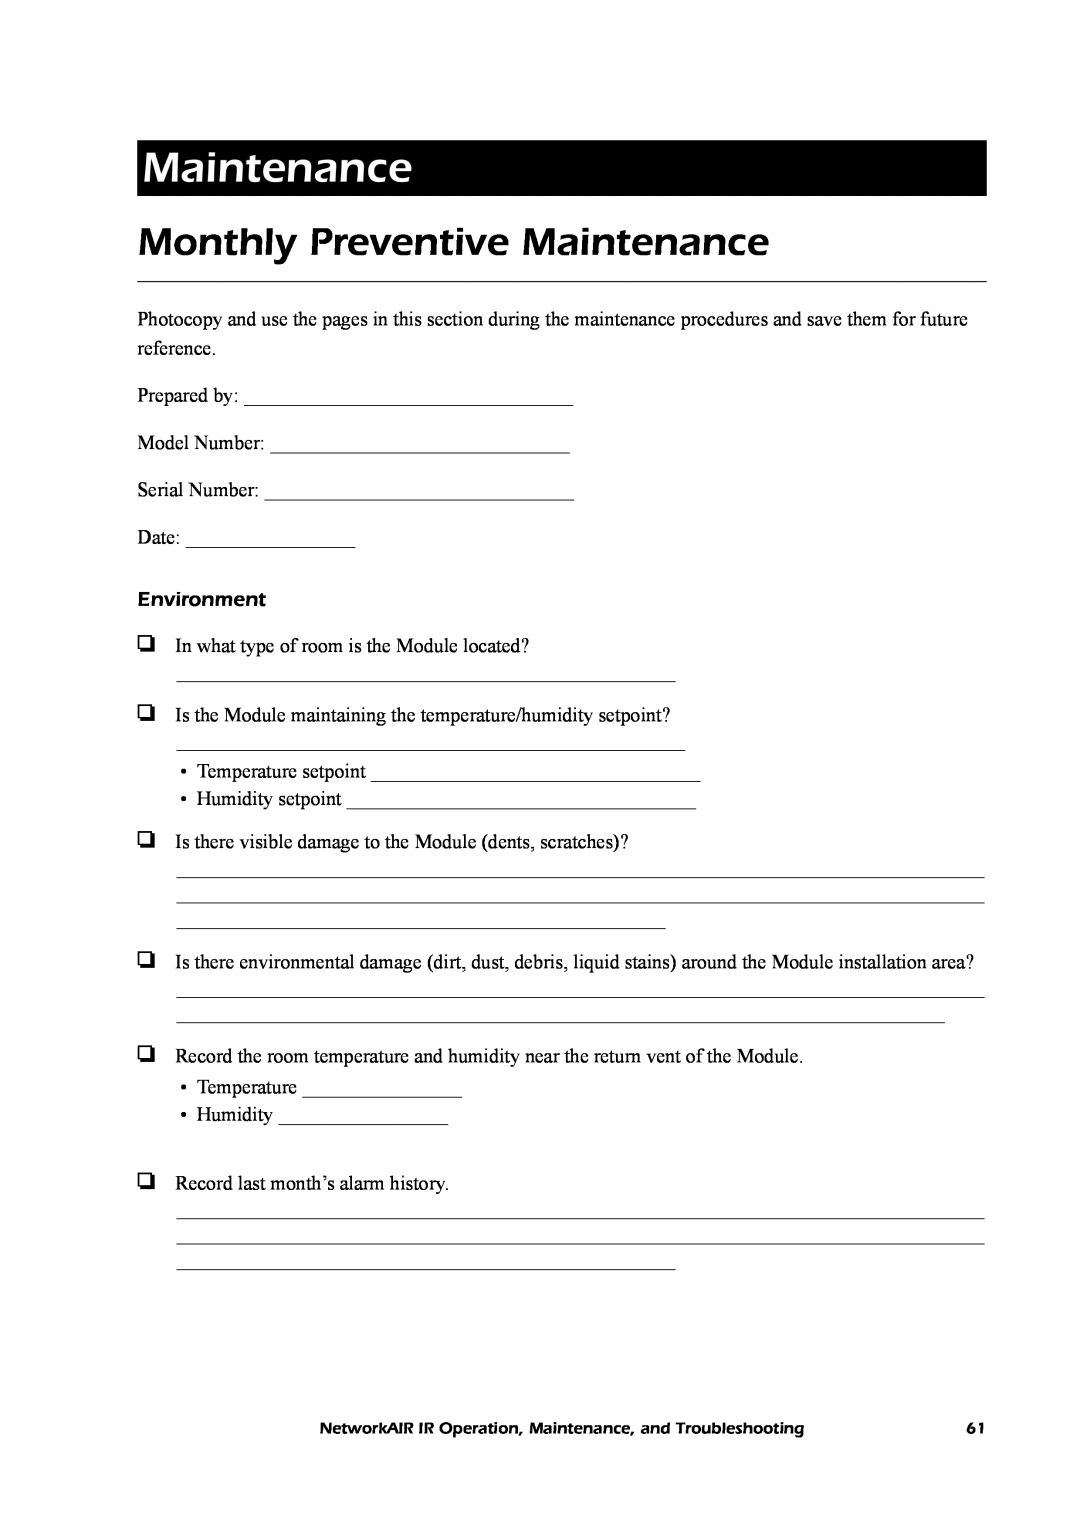 American Power Conversion Central Air Conditioning System manual Monthly Preventive Maintenance 